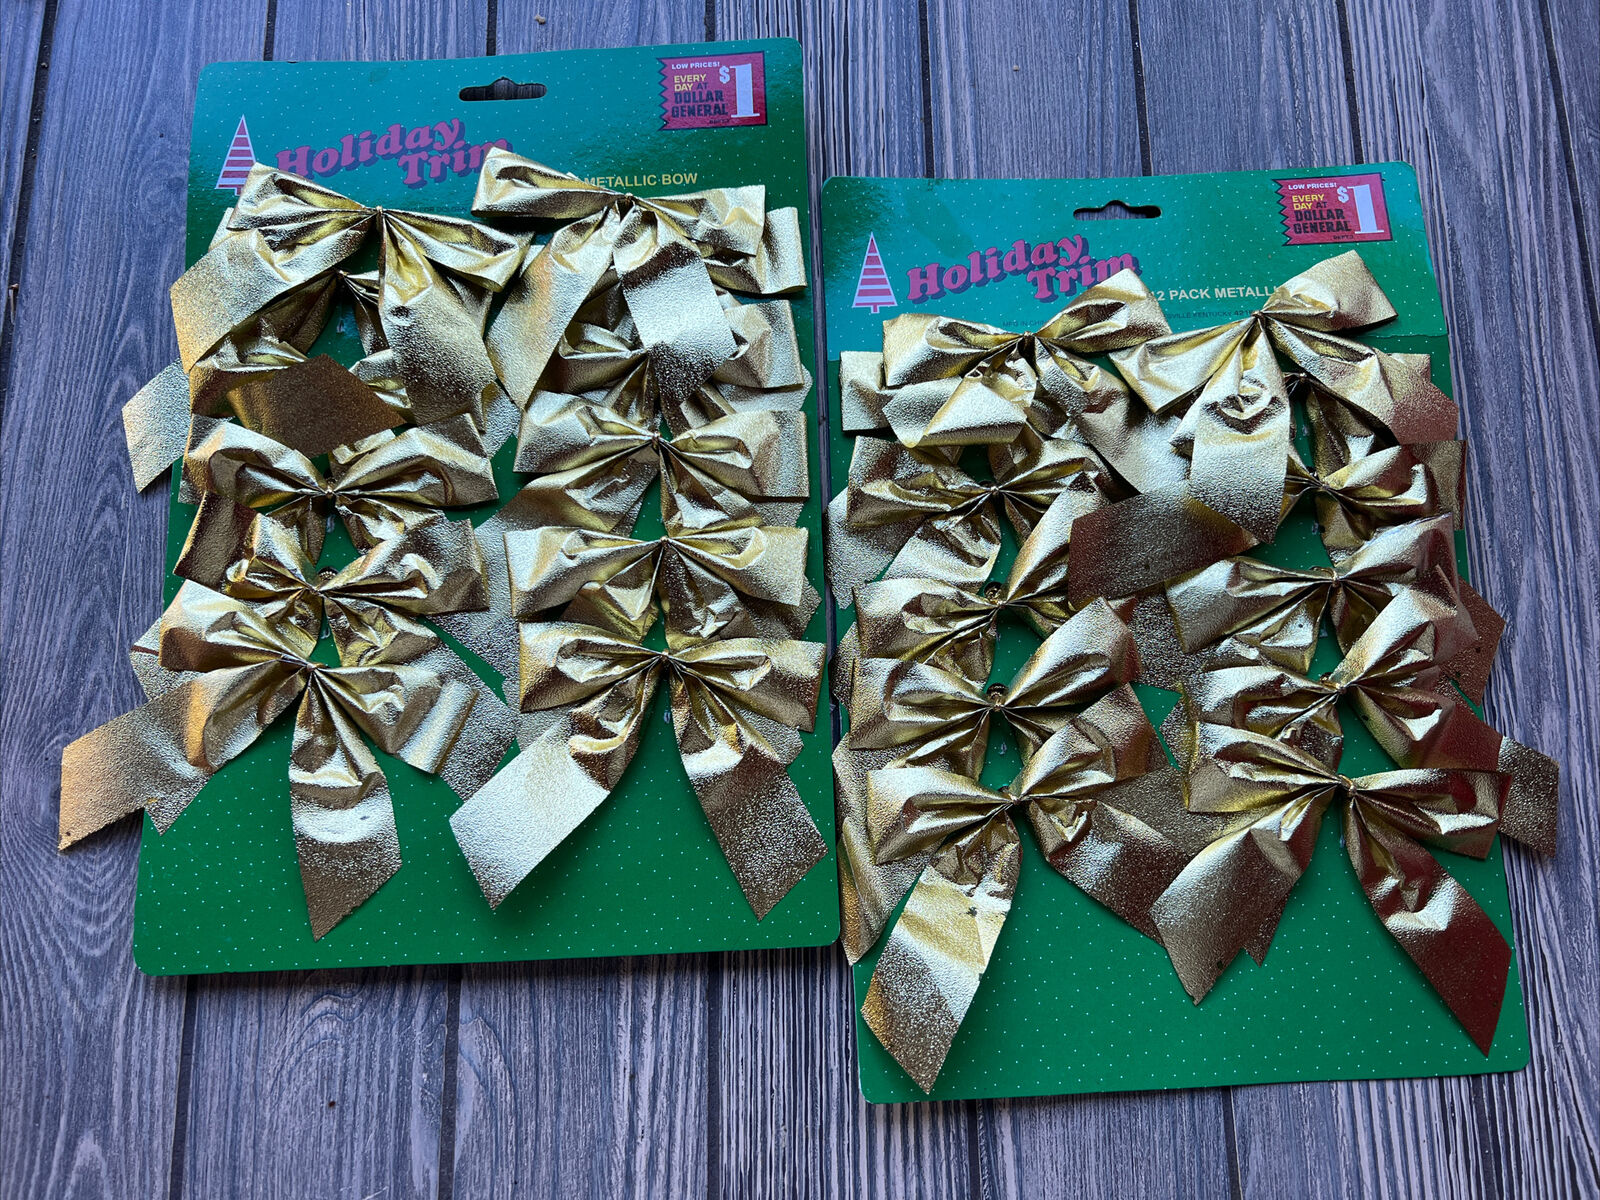 Vtg Holiday Trim Gold Foil Bows 4” Wide each 2 packs of 10 Metallic